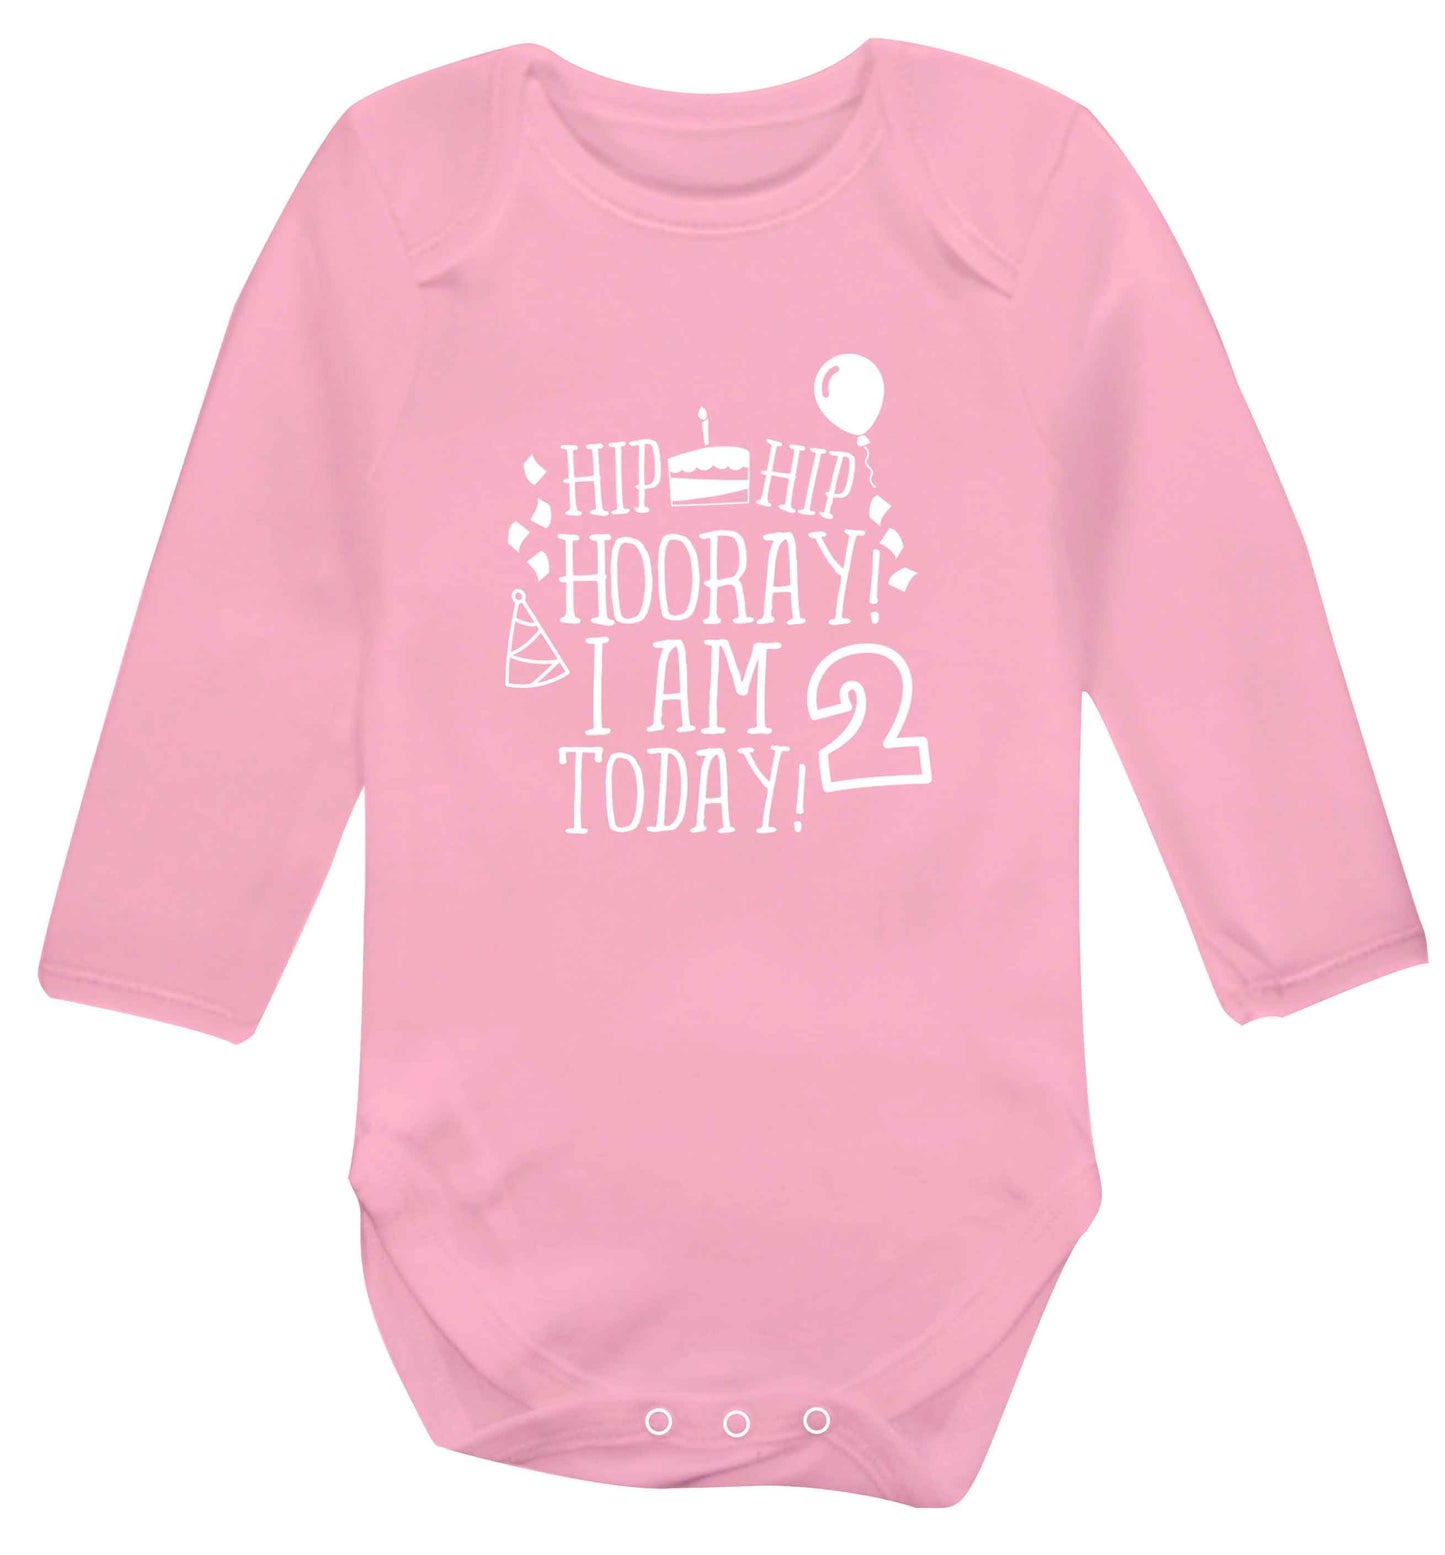 I'm 2 Today baby vest long sleeved pale pink 6-12 months